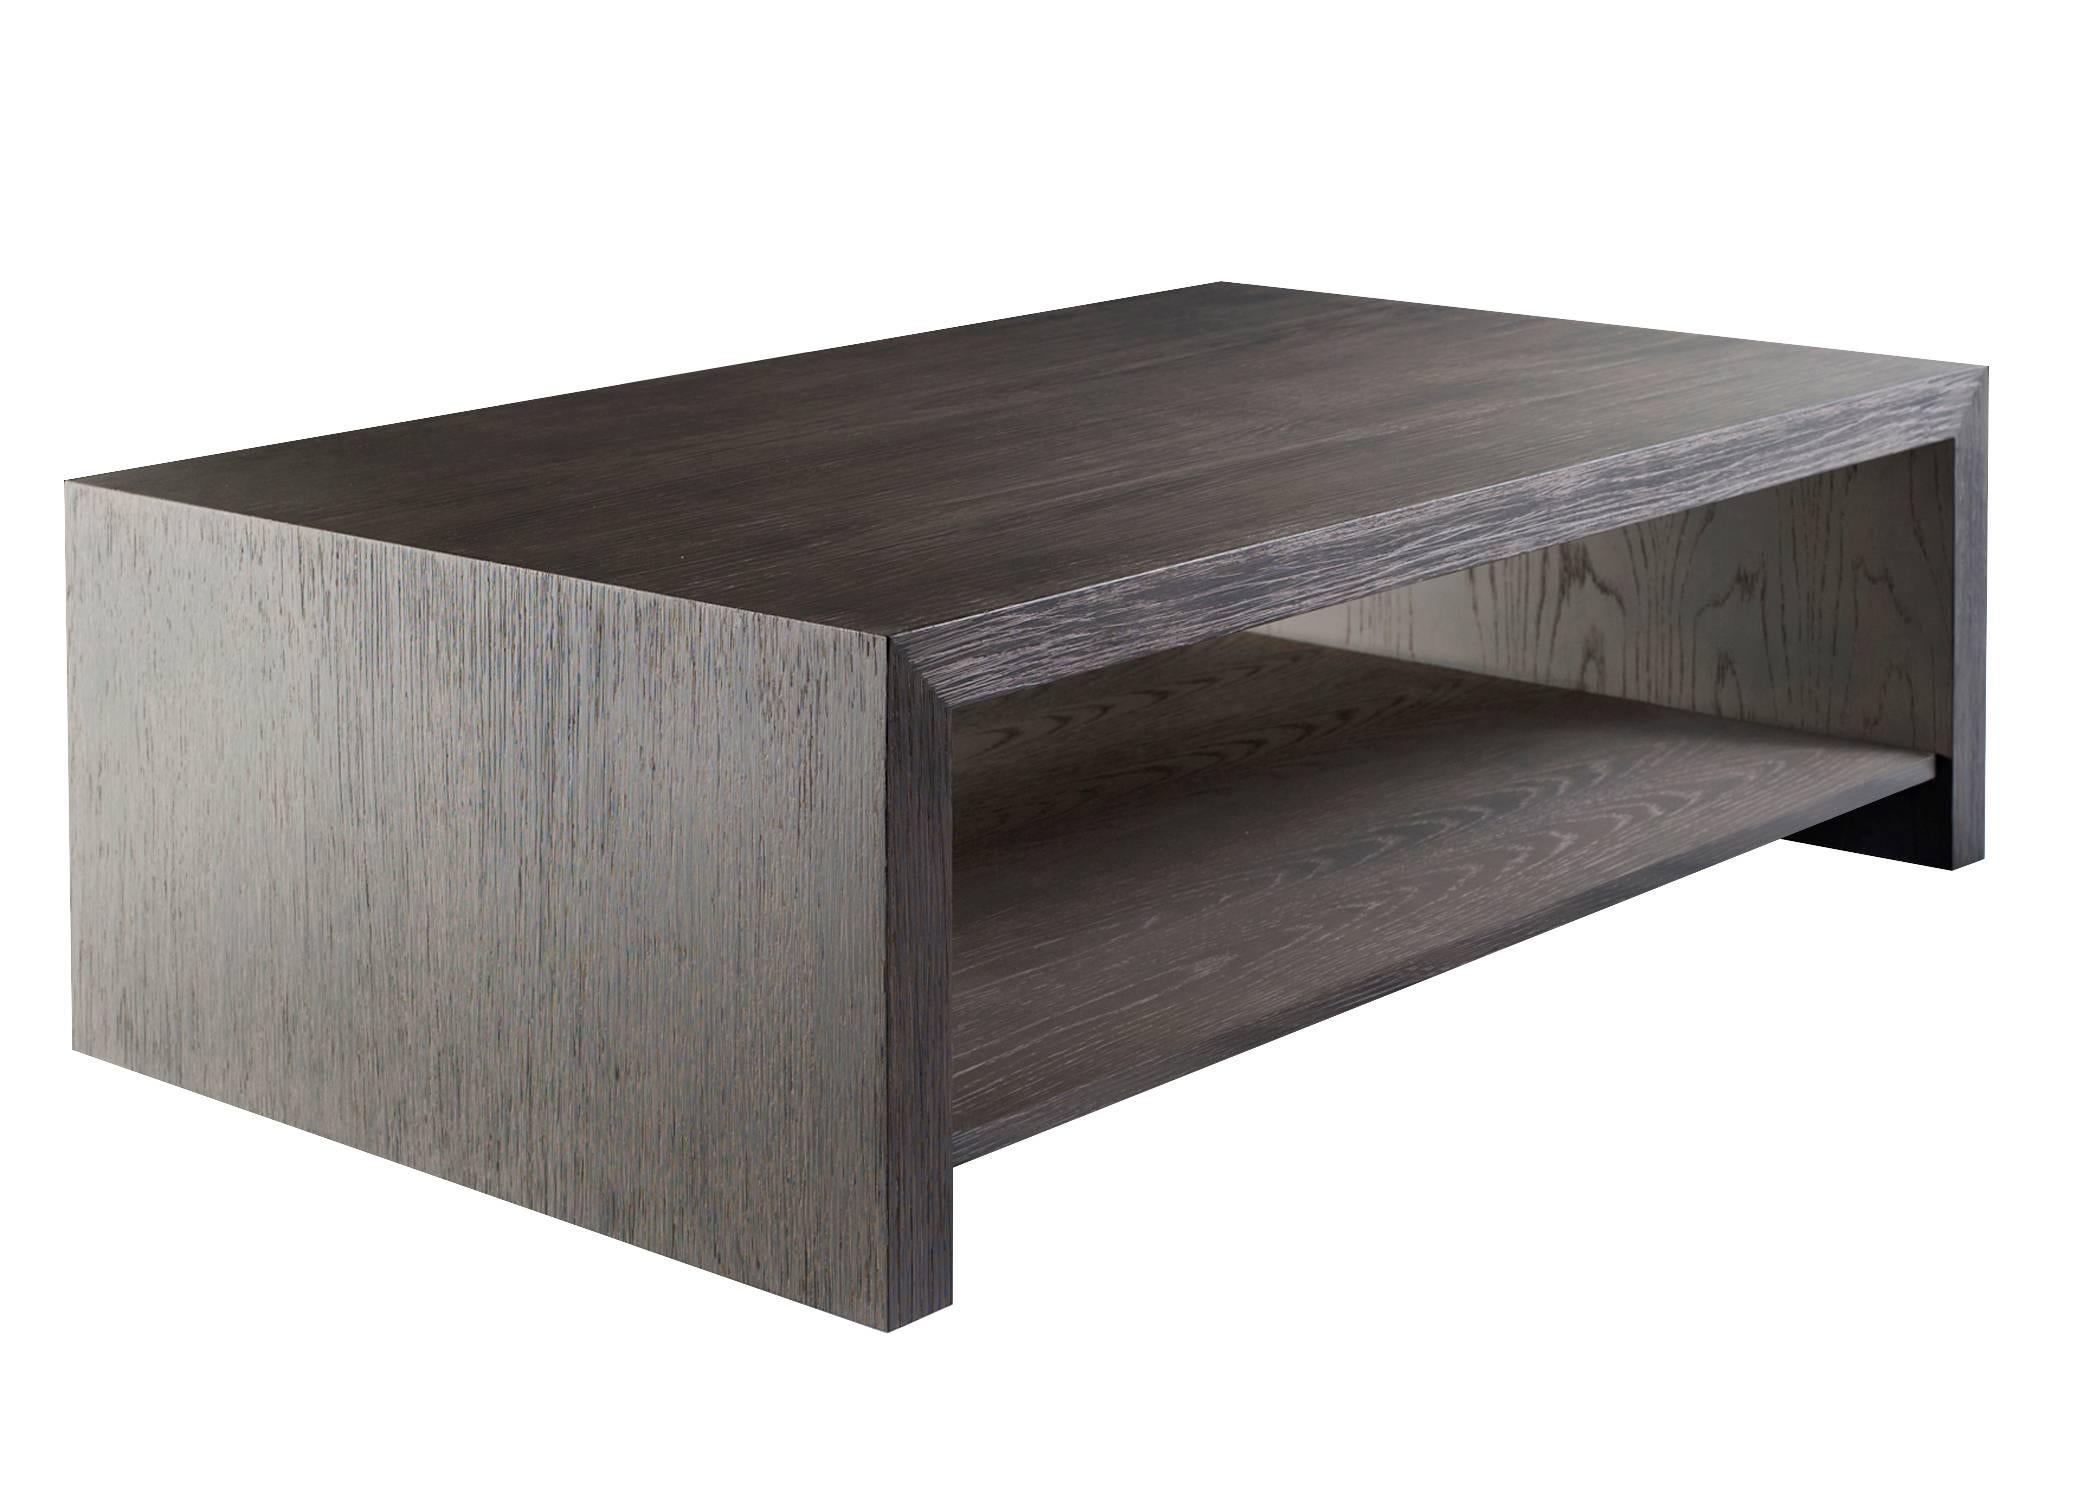 Shown in Drift Oak.
Measure: 48in x 30in x 16in H.

Each Desiron piece is handcrafted in the U.S.A, fully customizable and available in a variety of finishes.